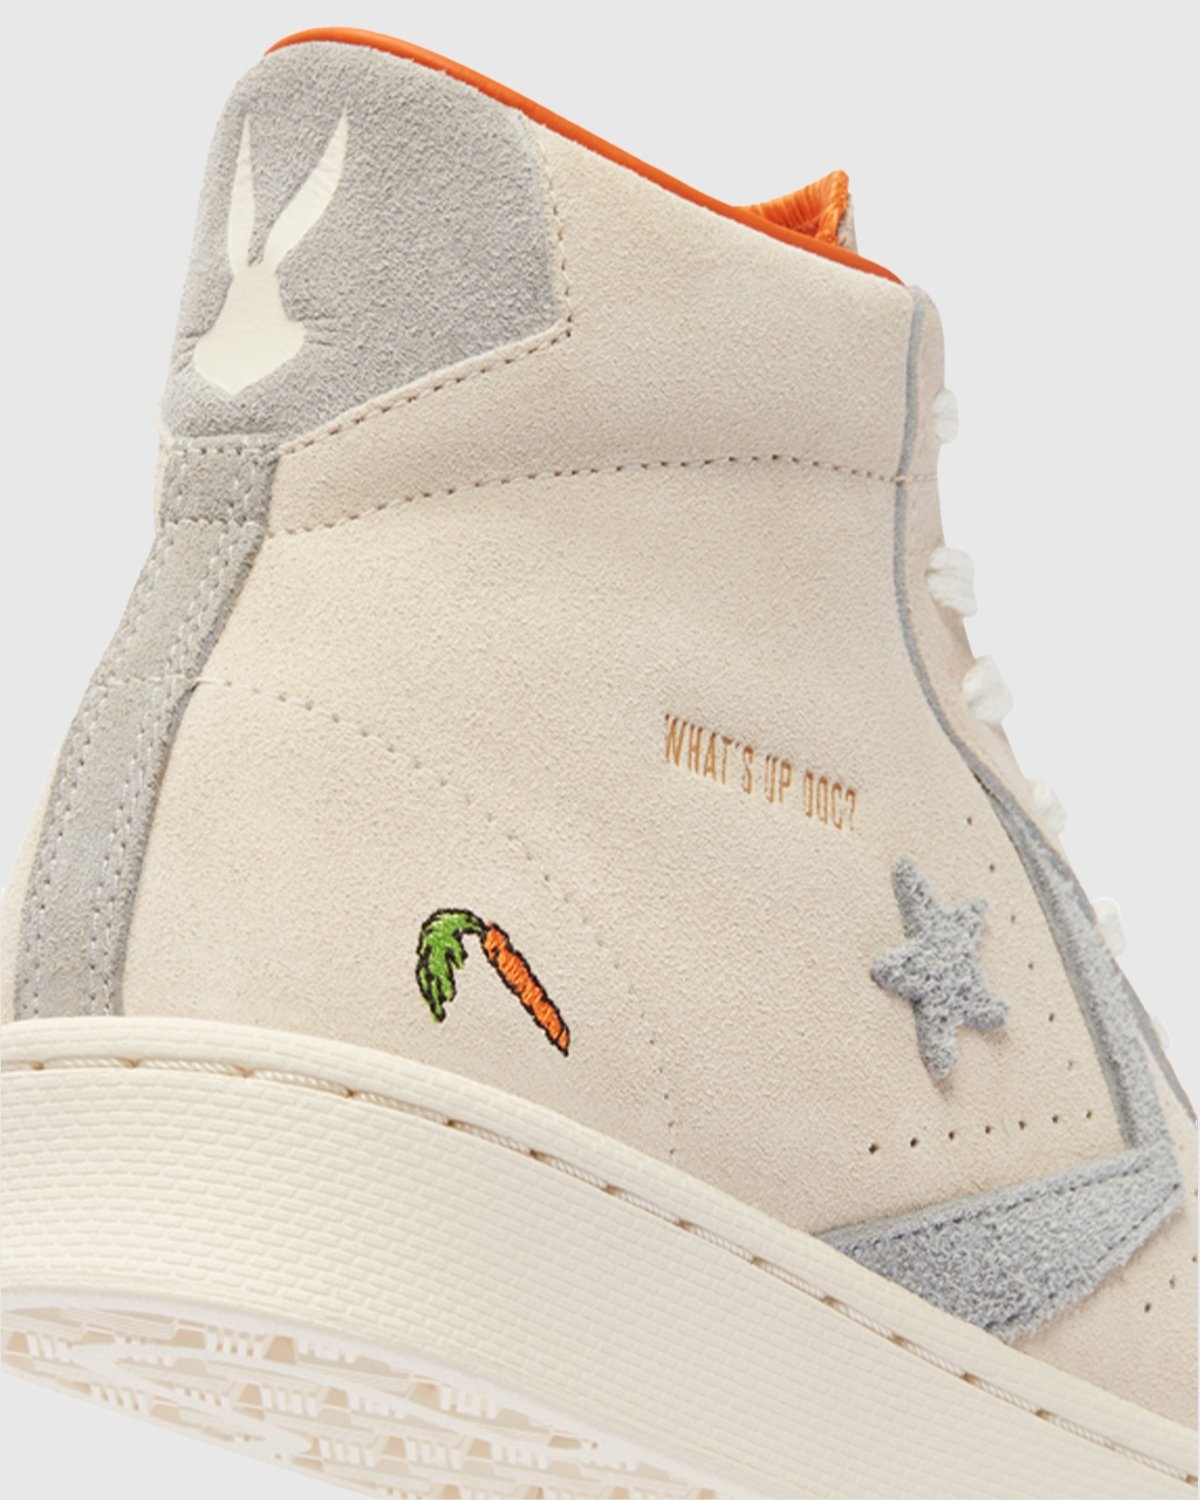 Converse – Bugs Bunny 80th Pro Leather High Natural Ivory - High Top Sneakers - Beige - Image 5